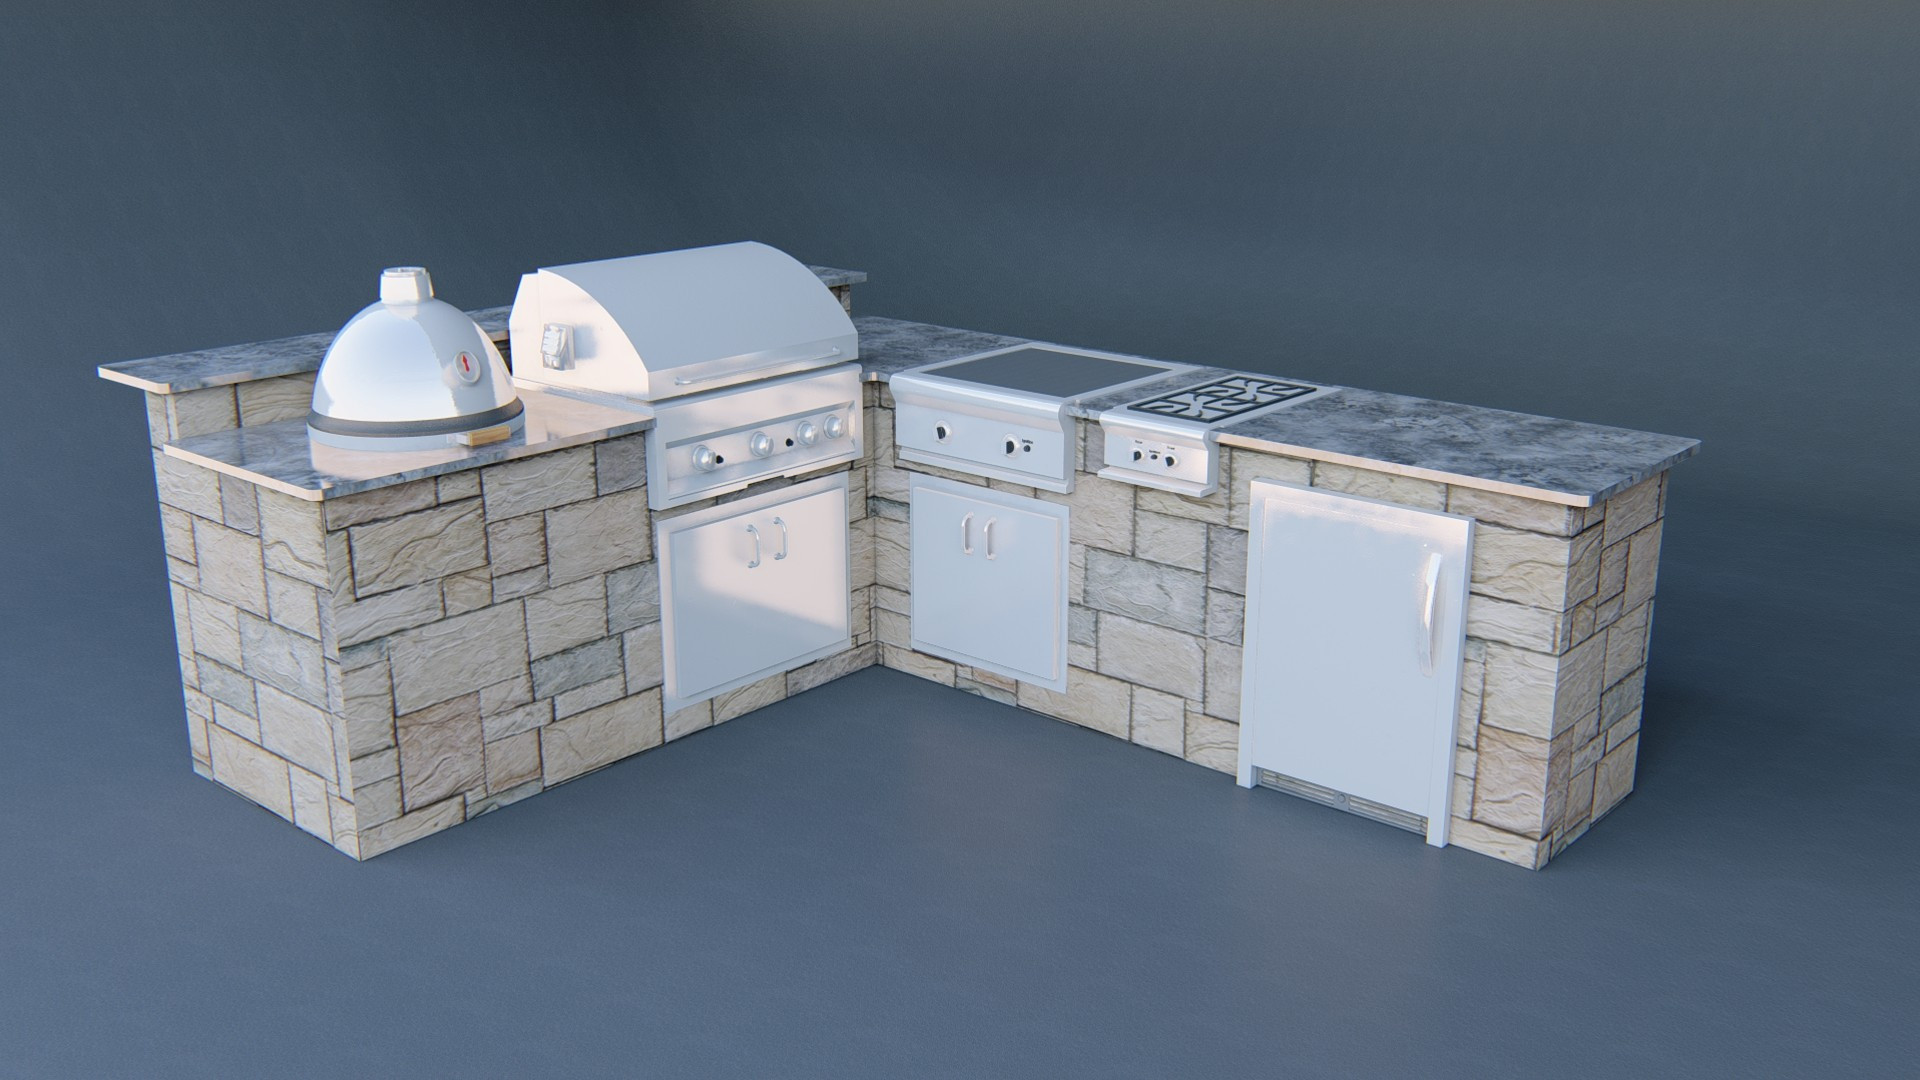 Outdoor Kitchen Sketchup
 Outdoor Kitchen Island with Bar 3D Model